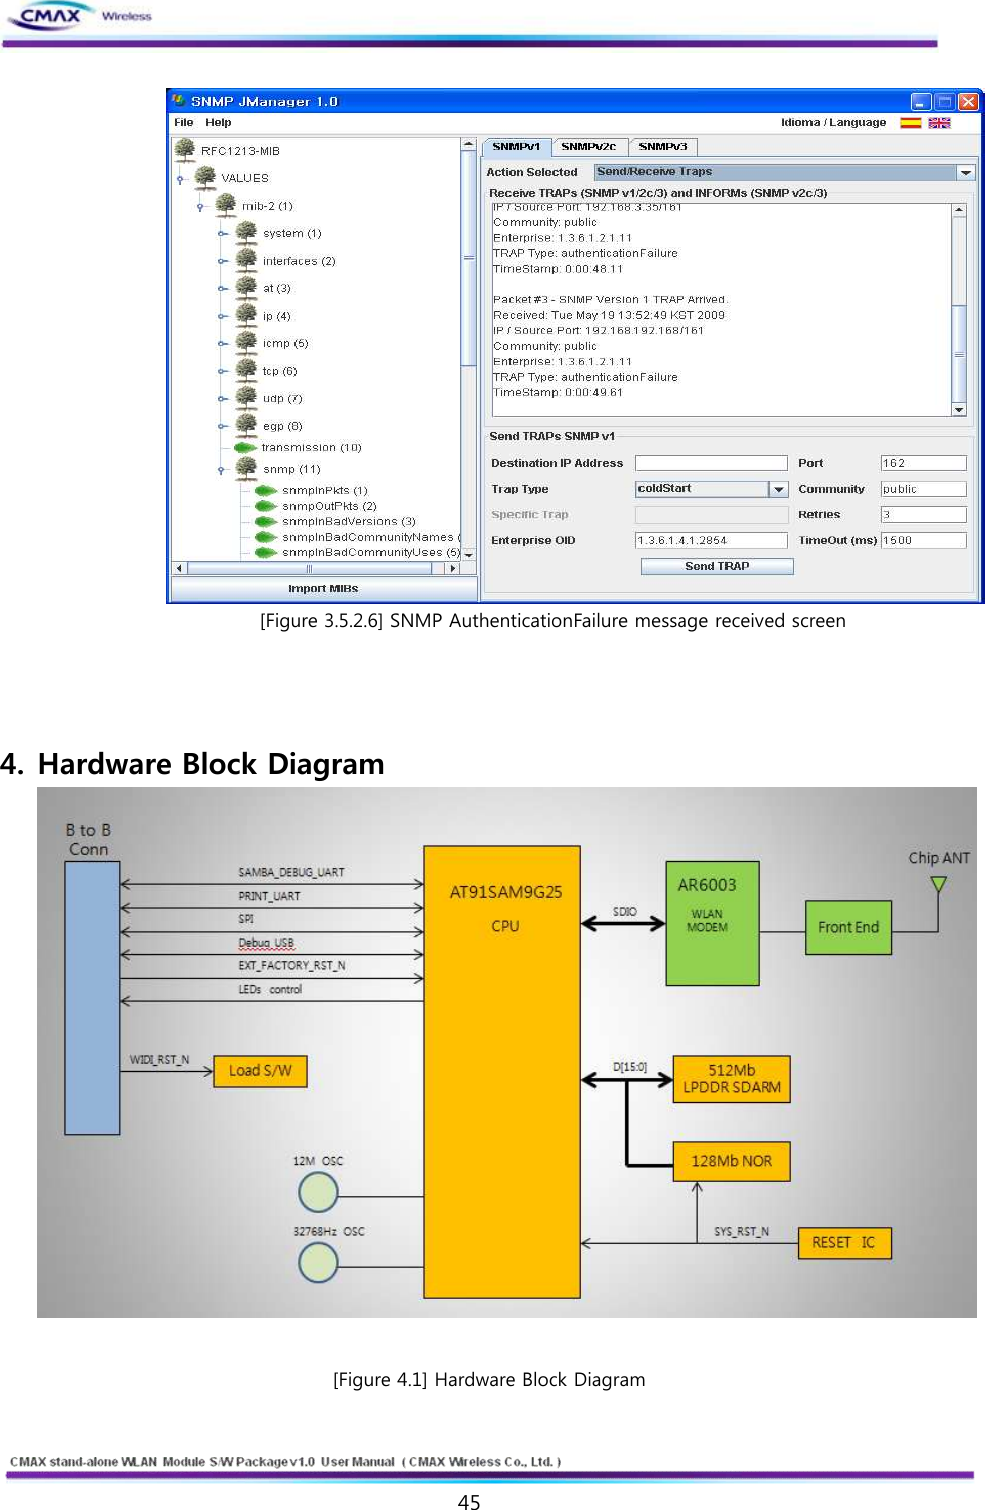   45  www.cmaxwireless.co.kr  [Figure 3.5.2.6] SNMP AuthenticationFailure message received screen    4. Hardware Block Diagram    [Figure 4.1] Hardware Block Diagram  